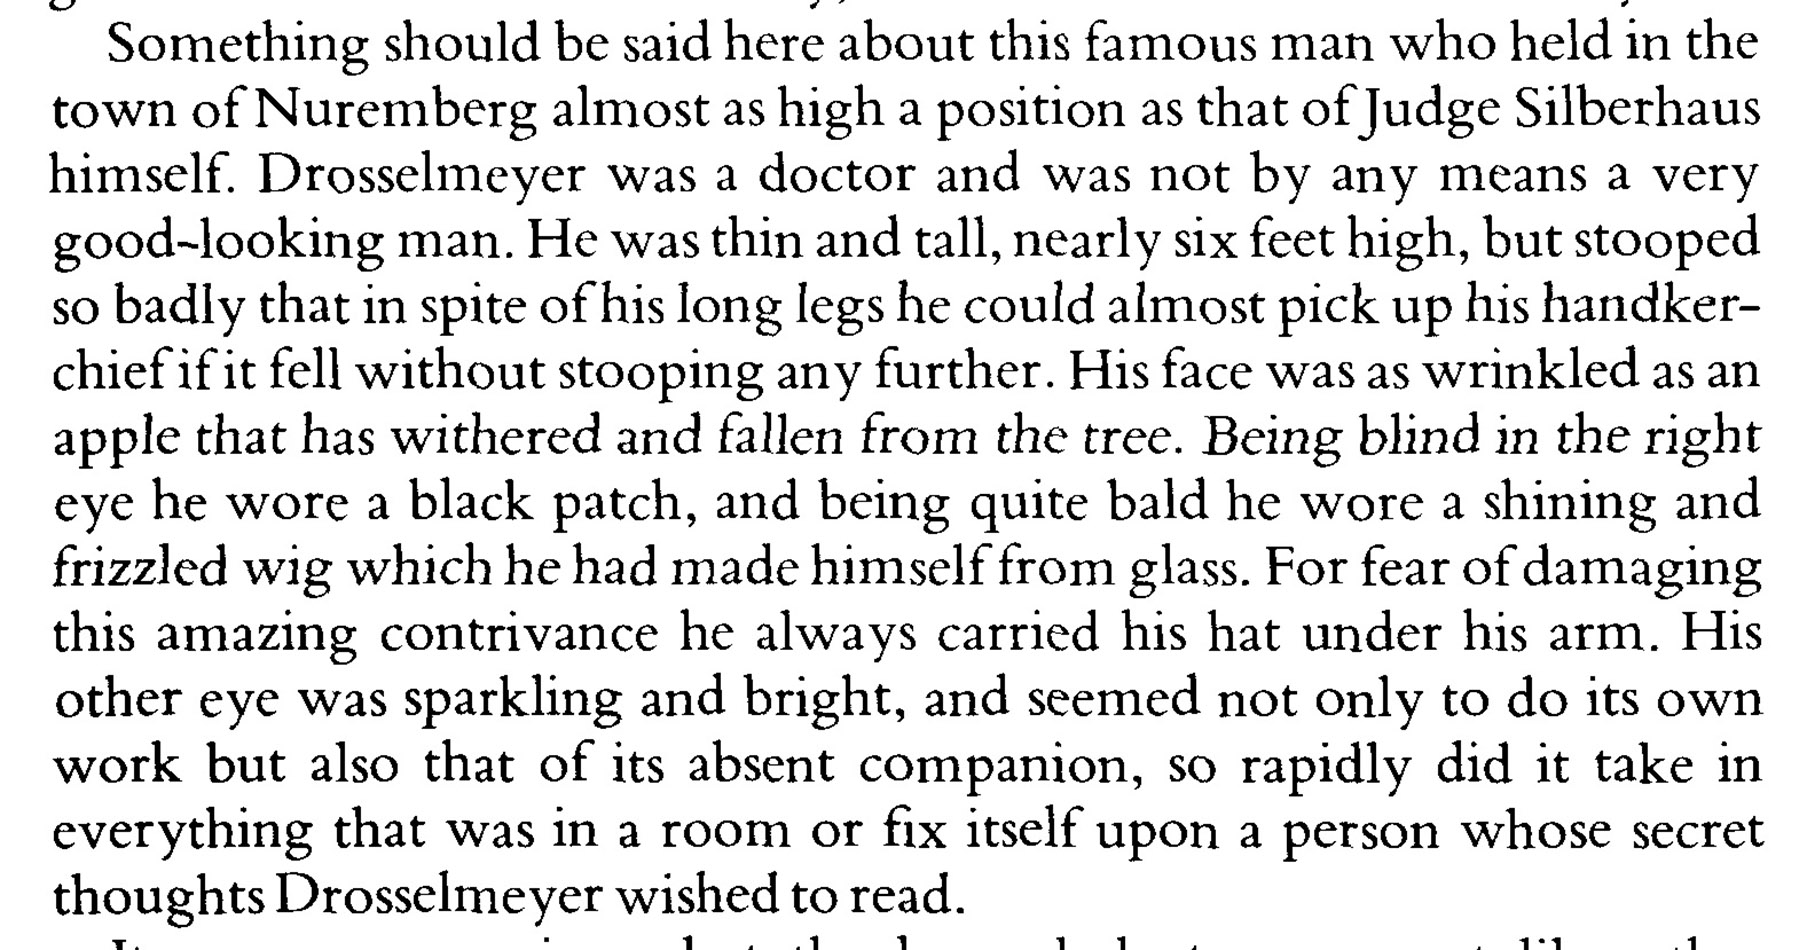 The description of Dr Drosselmeyer, from p. 2 of the text.